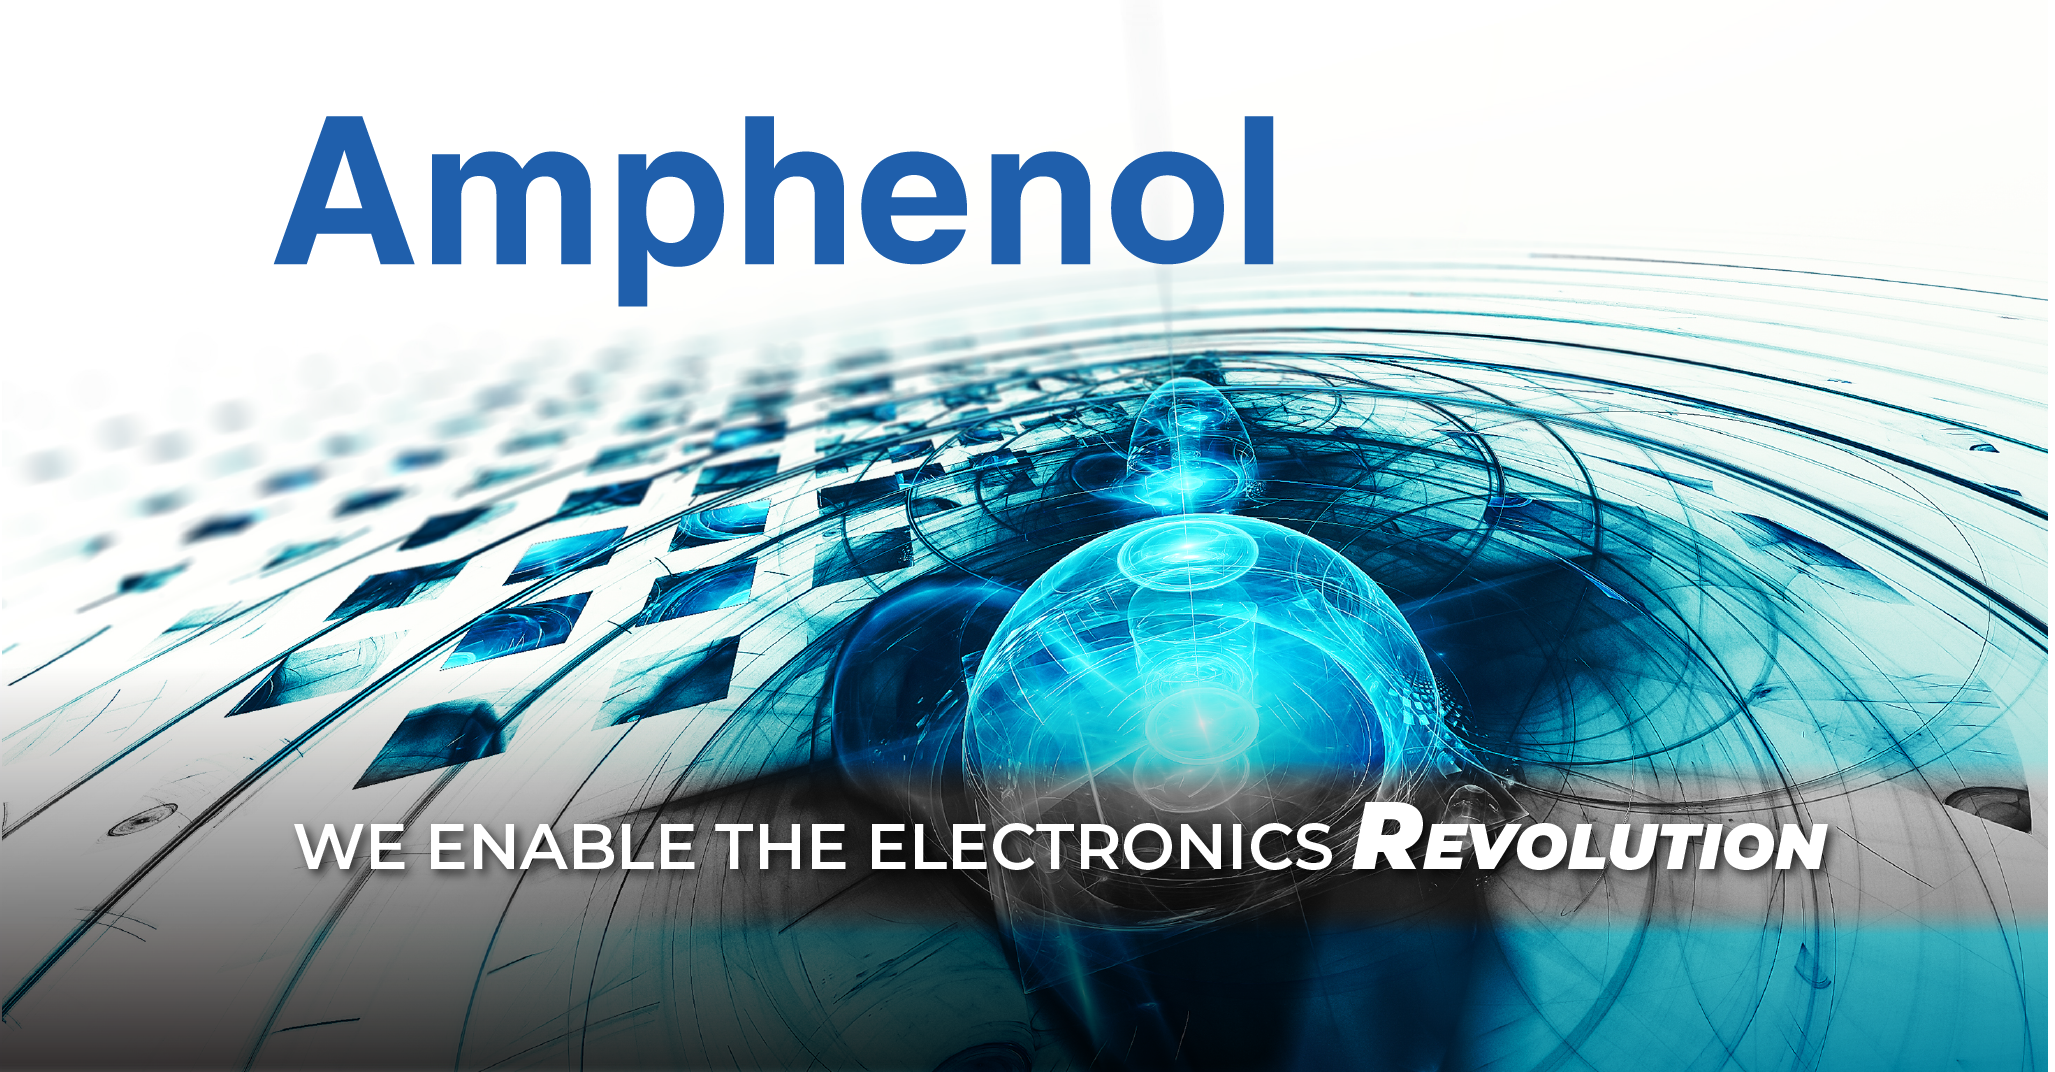 Featured image for “Amphenol | We Enable the Electronics Revolution”